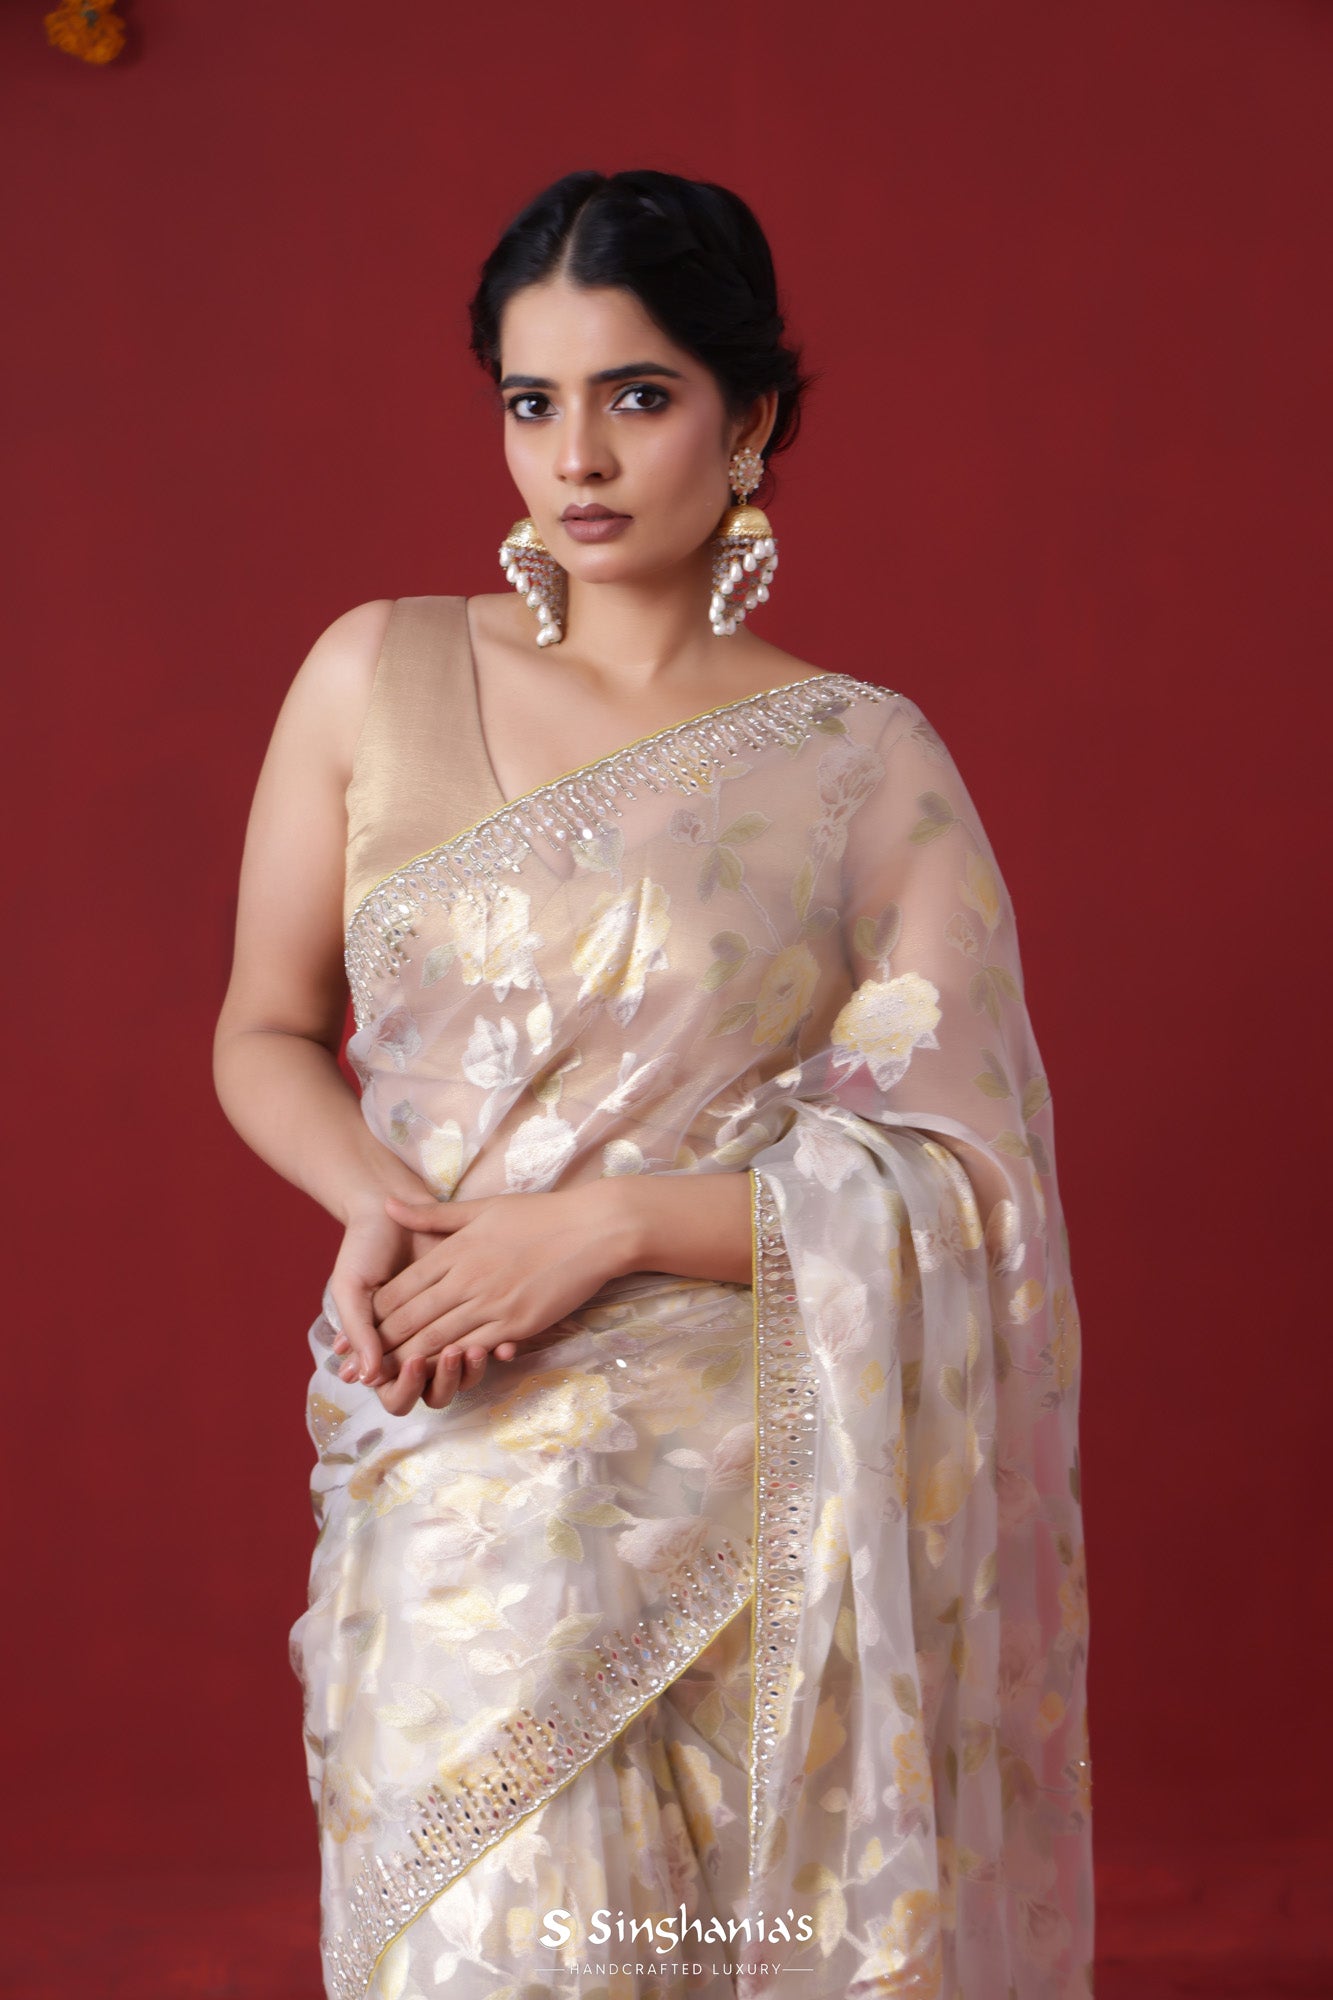 Sayali Rajadhyaksha Sarees - Last day of Silks under 15000 festival Have  you shop your much needed silk sarees or blouses from Sayali Rajadhyaksha  Sarees' silks under 15000 festival? If not then